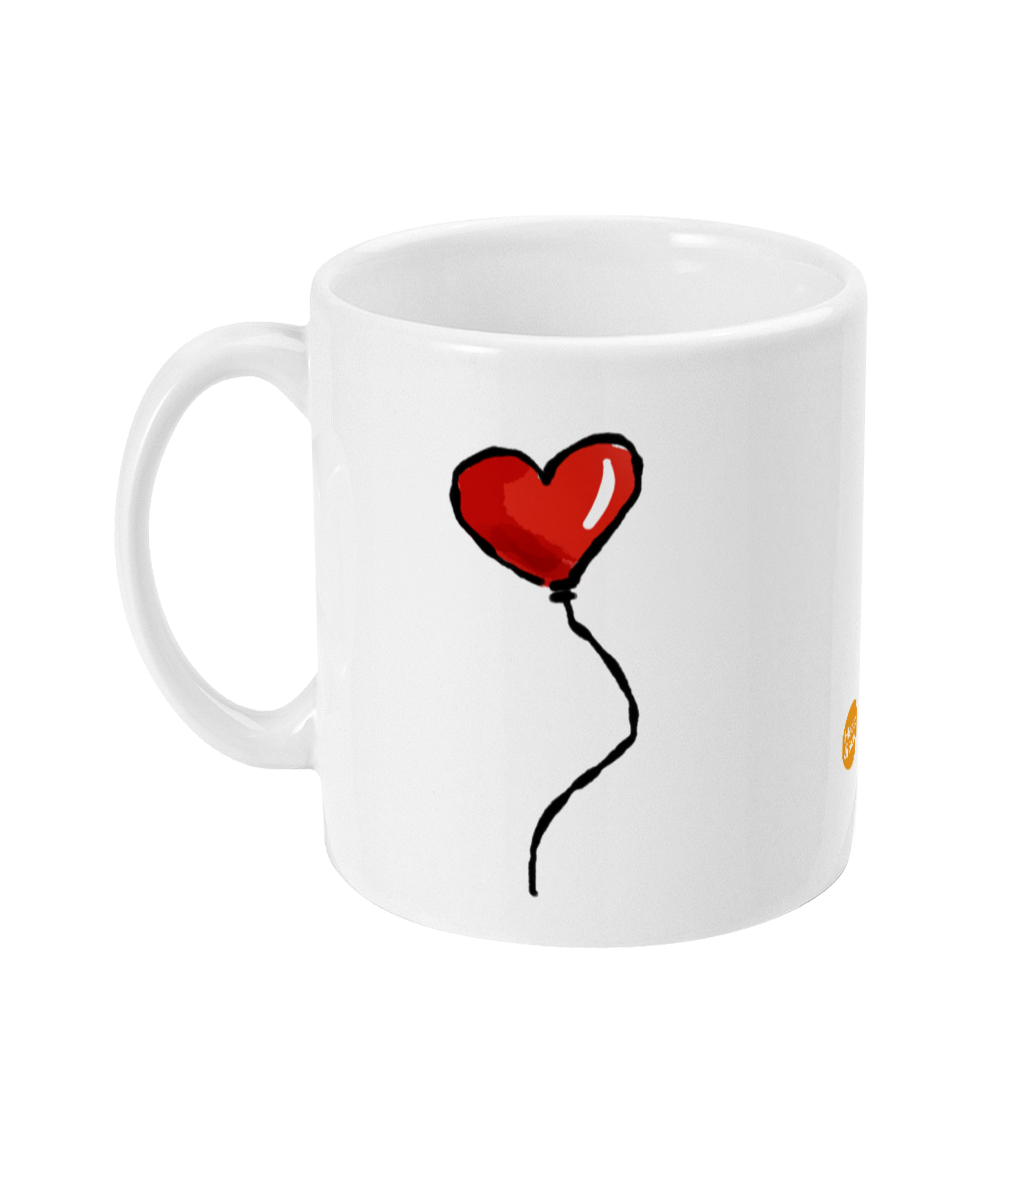 Red Heart Mug - Red Heart illustrated coffee mug by Hector and Bone Left View